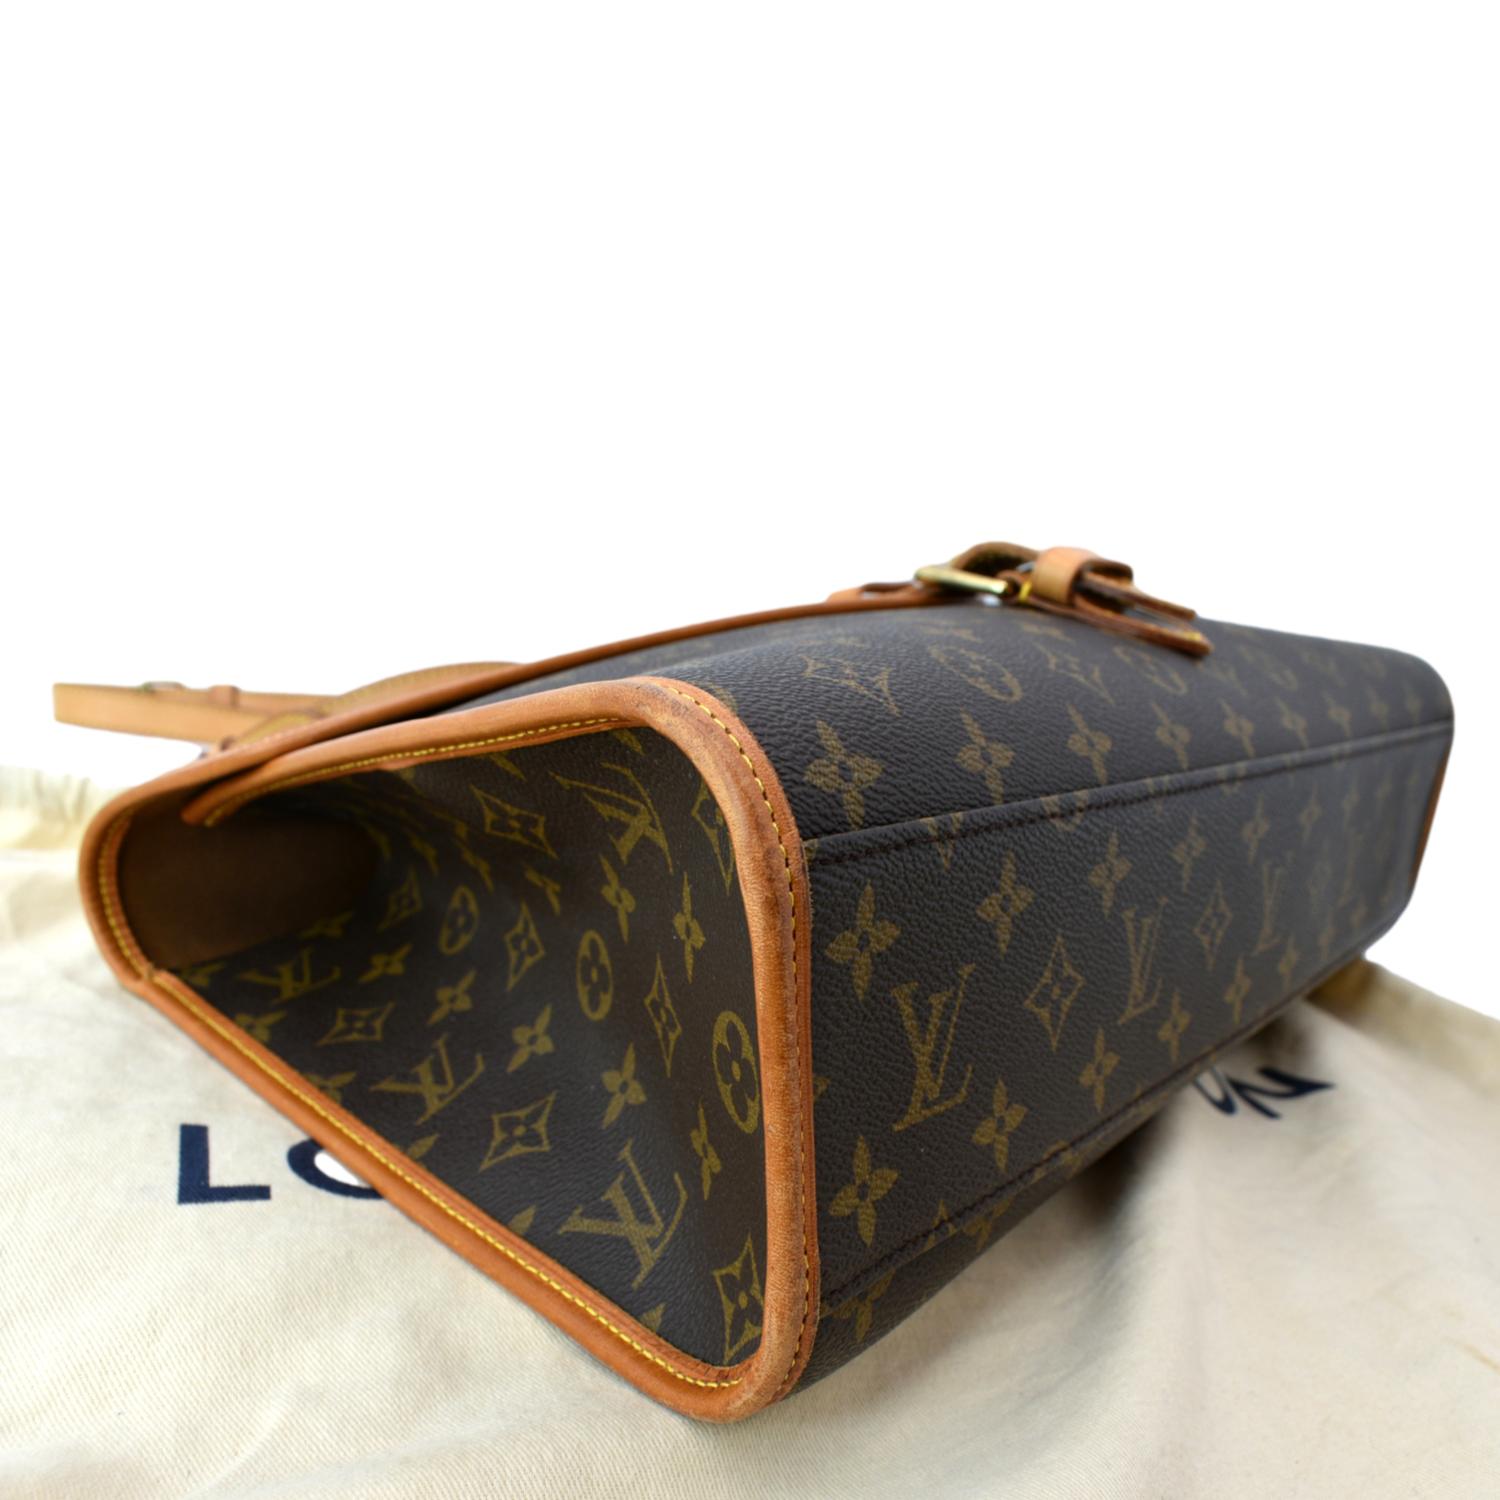 LOUIS VUITTON Monogram Beverly GM Briefcase for Sale in